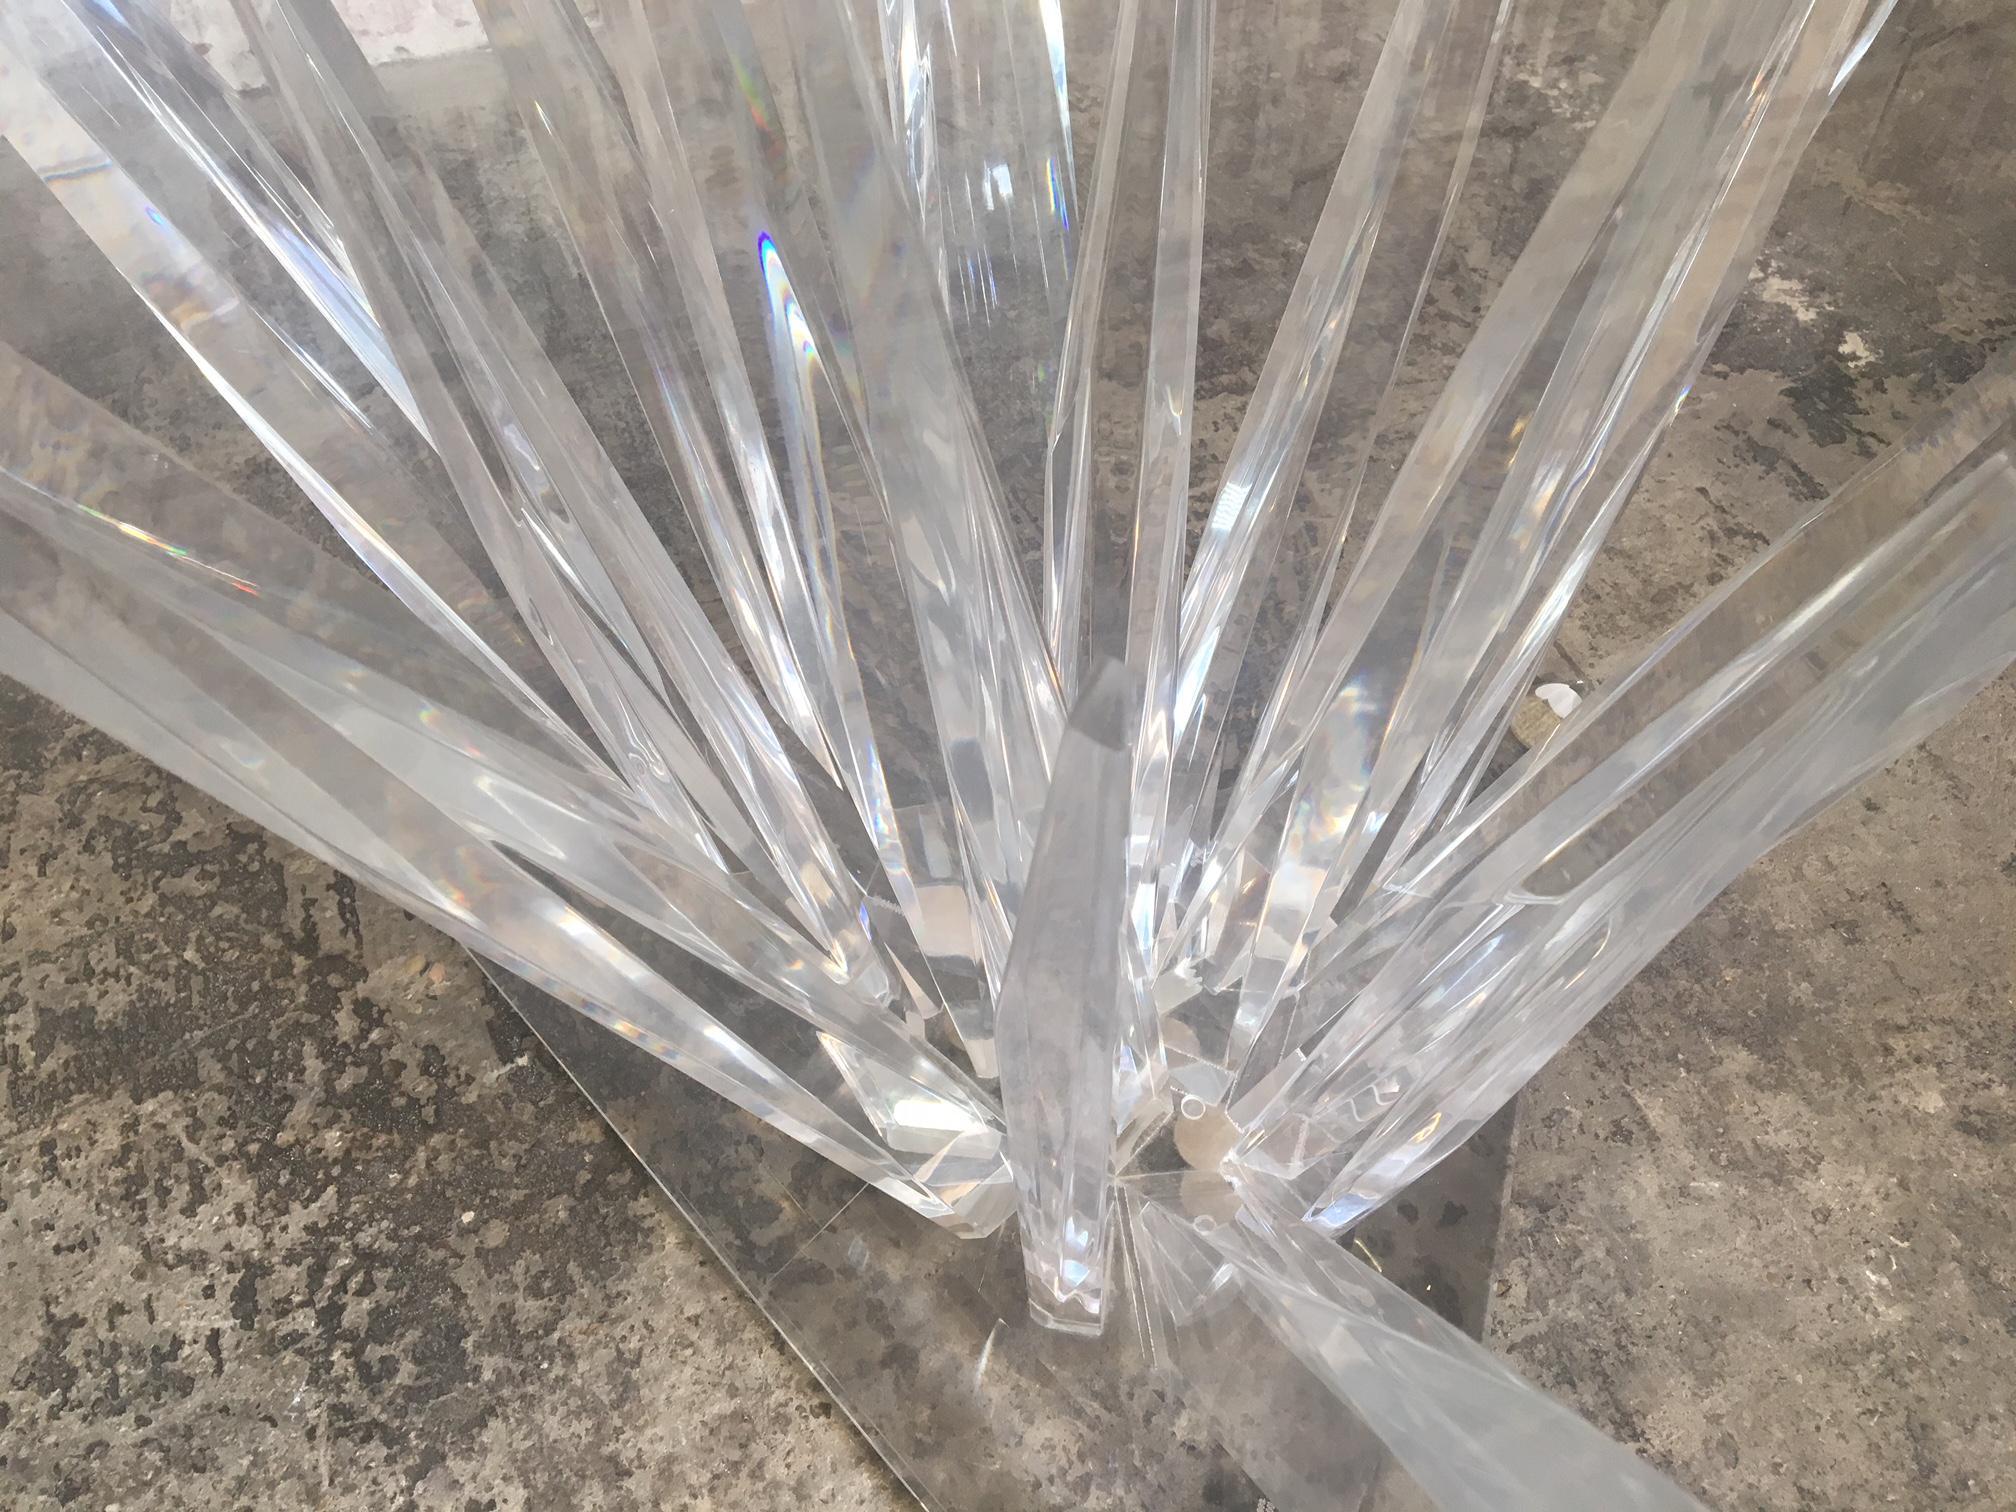 Sculptural Lucite dining table mimicking stalagmites with glass top, circa 1979. Lucite in very good condition, free from scratches or discoloration. Glass top has surface scratches. Definite statement piece. Glass measures 48